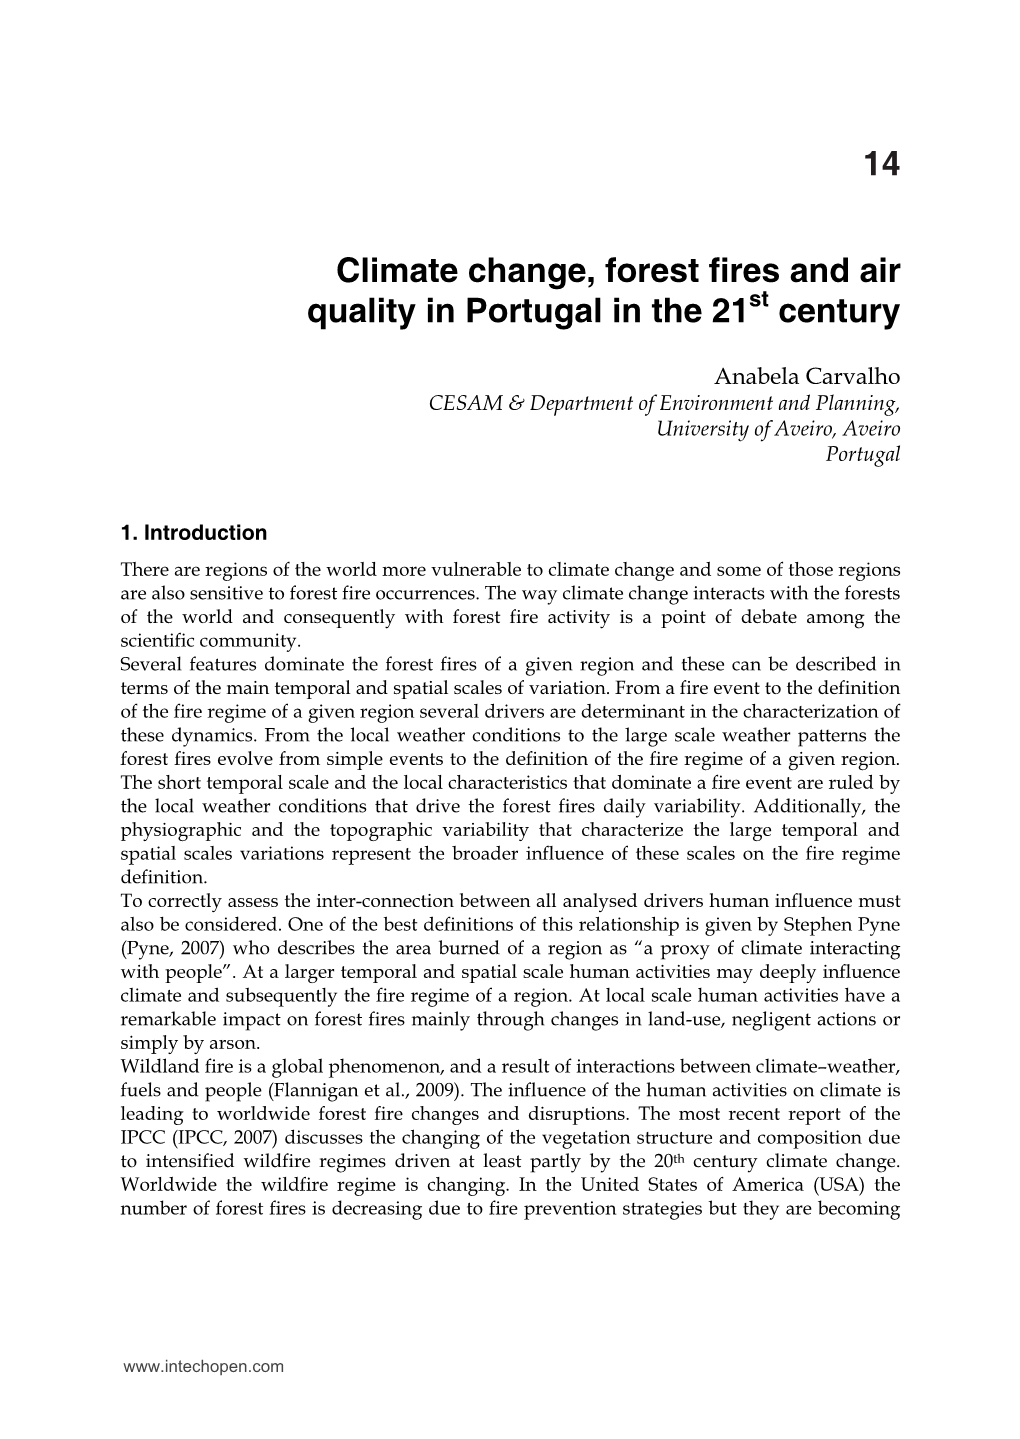 Climate Change, Forest Fires and Air Quality in Portugal in the 21St Century